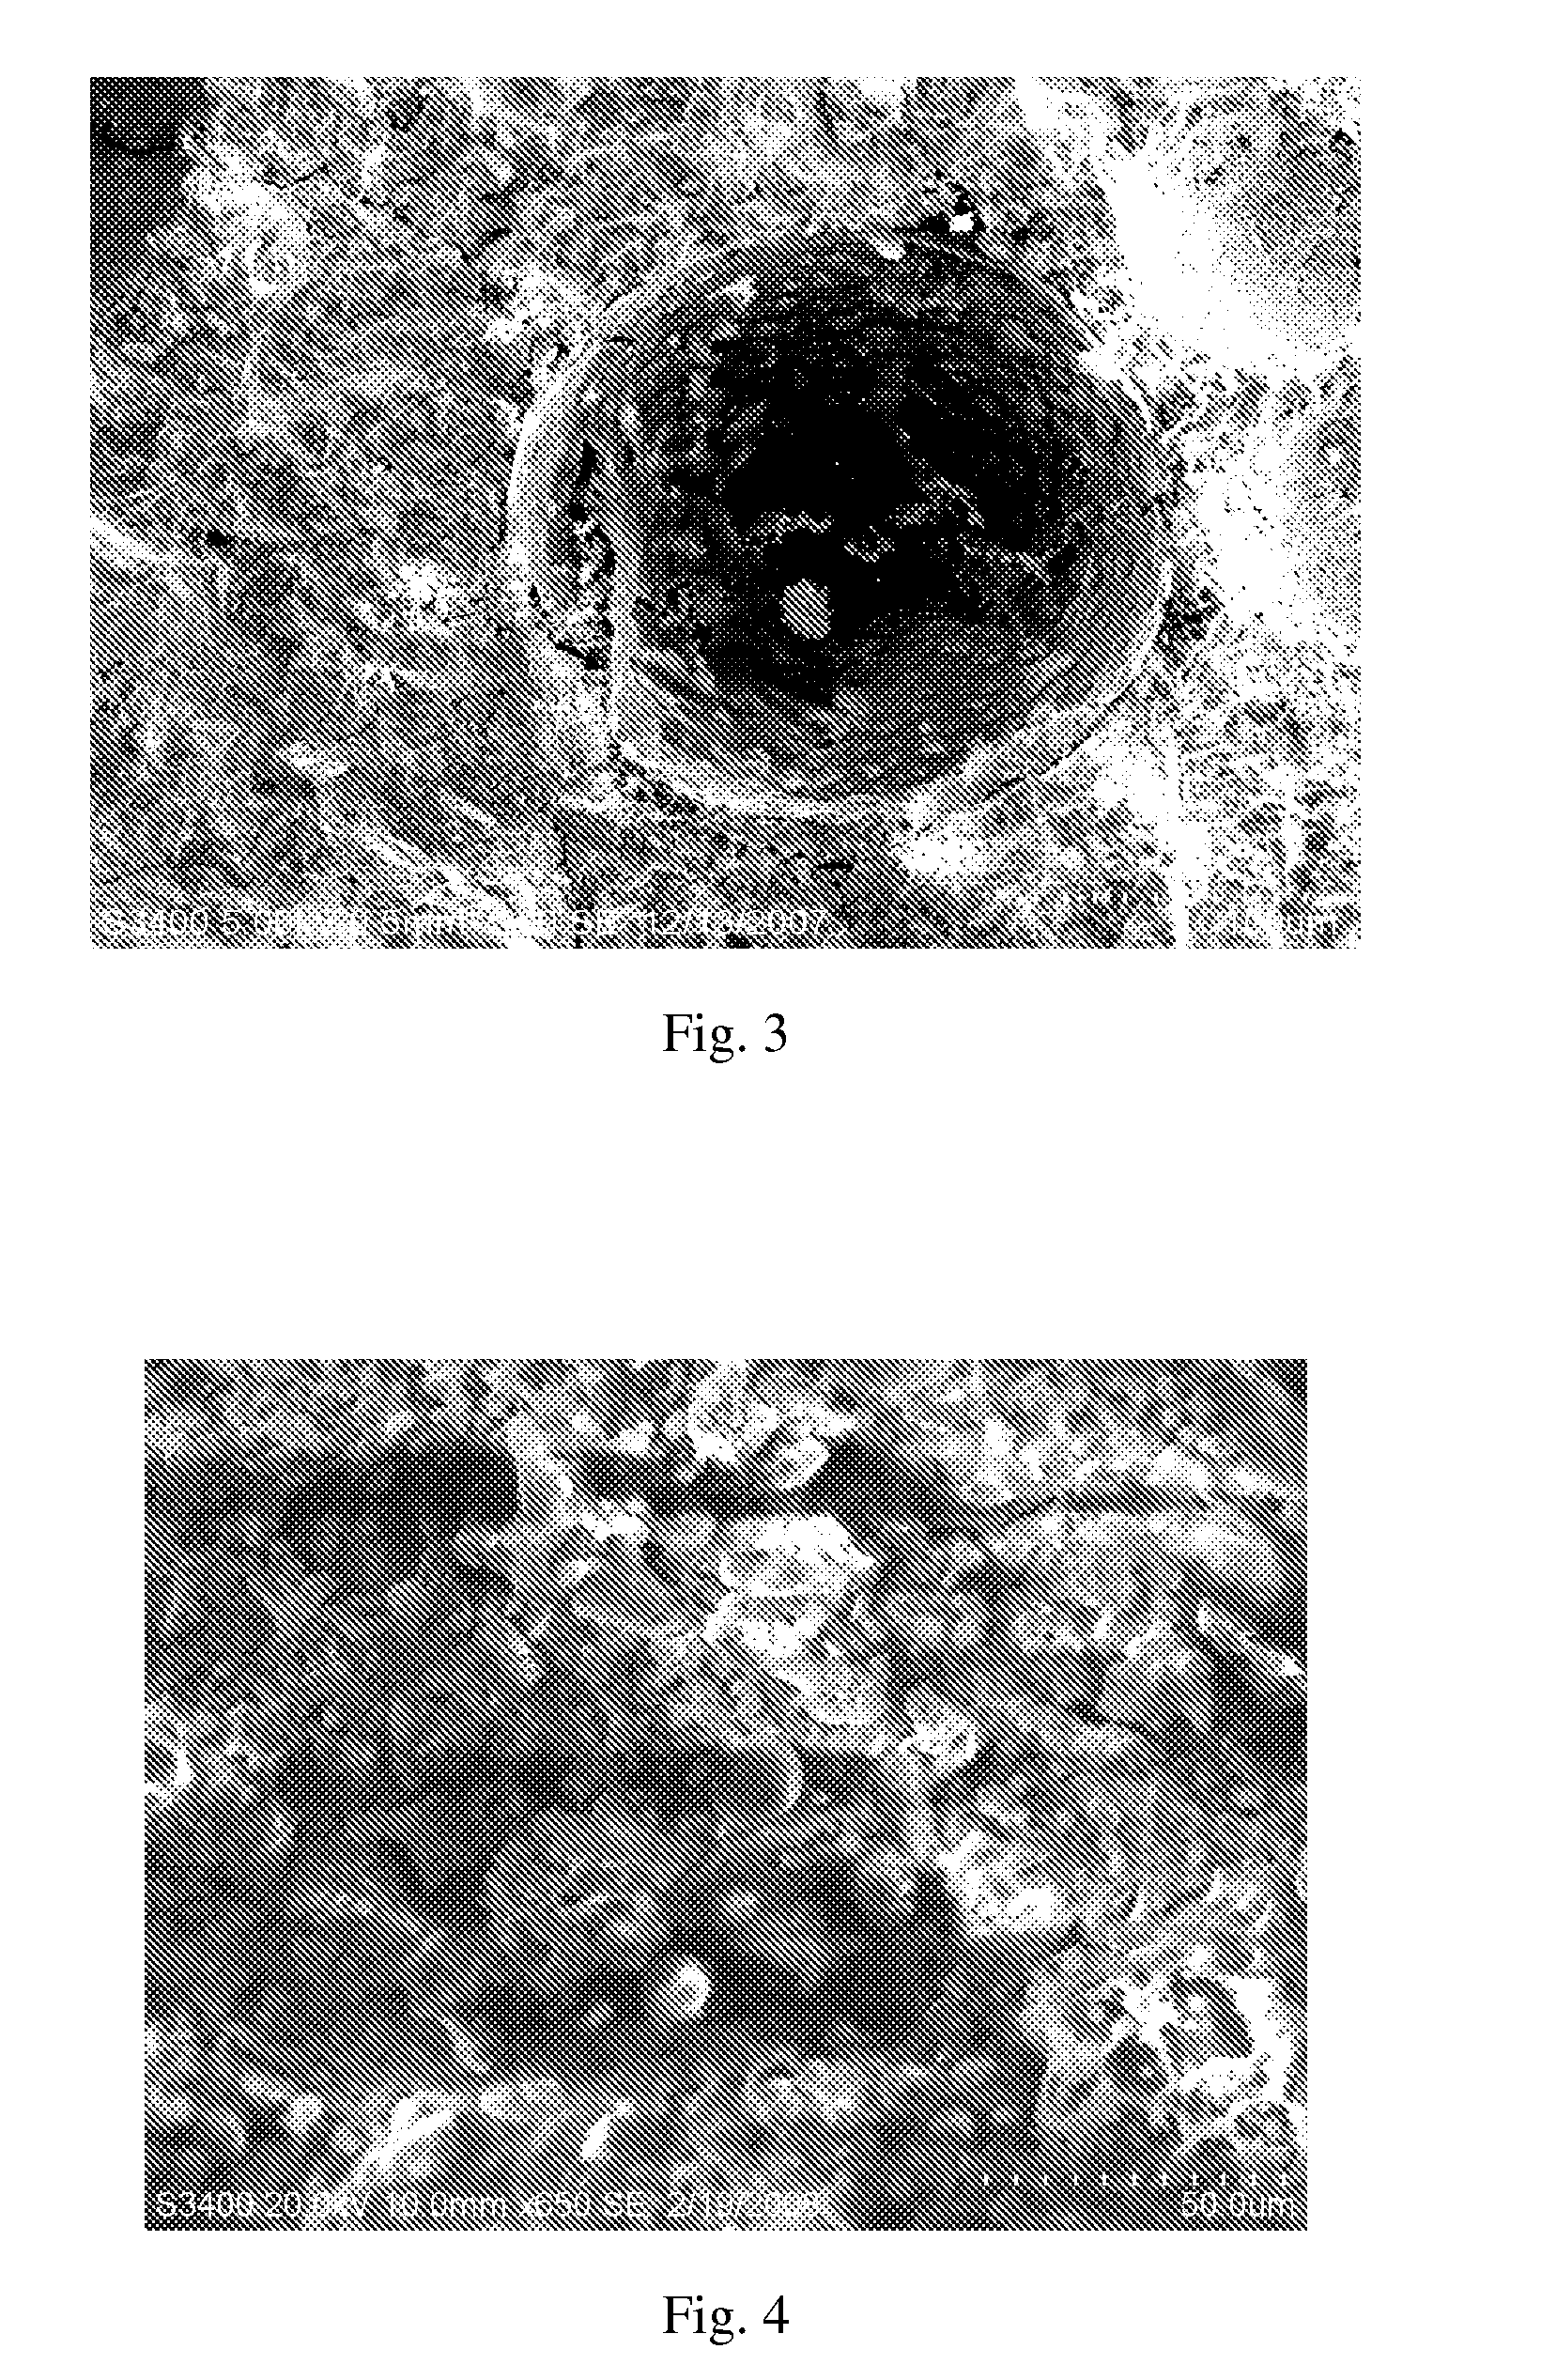 Self-Repairing Concrete Used Urea-Formaldehyde Resin Polymer Micro-Capsules and Method for Fabricating Same